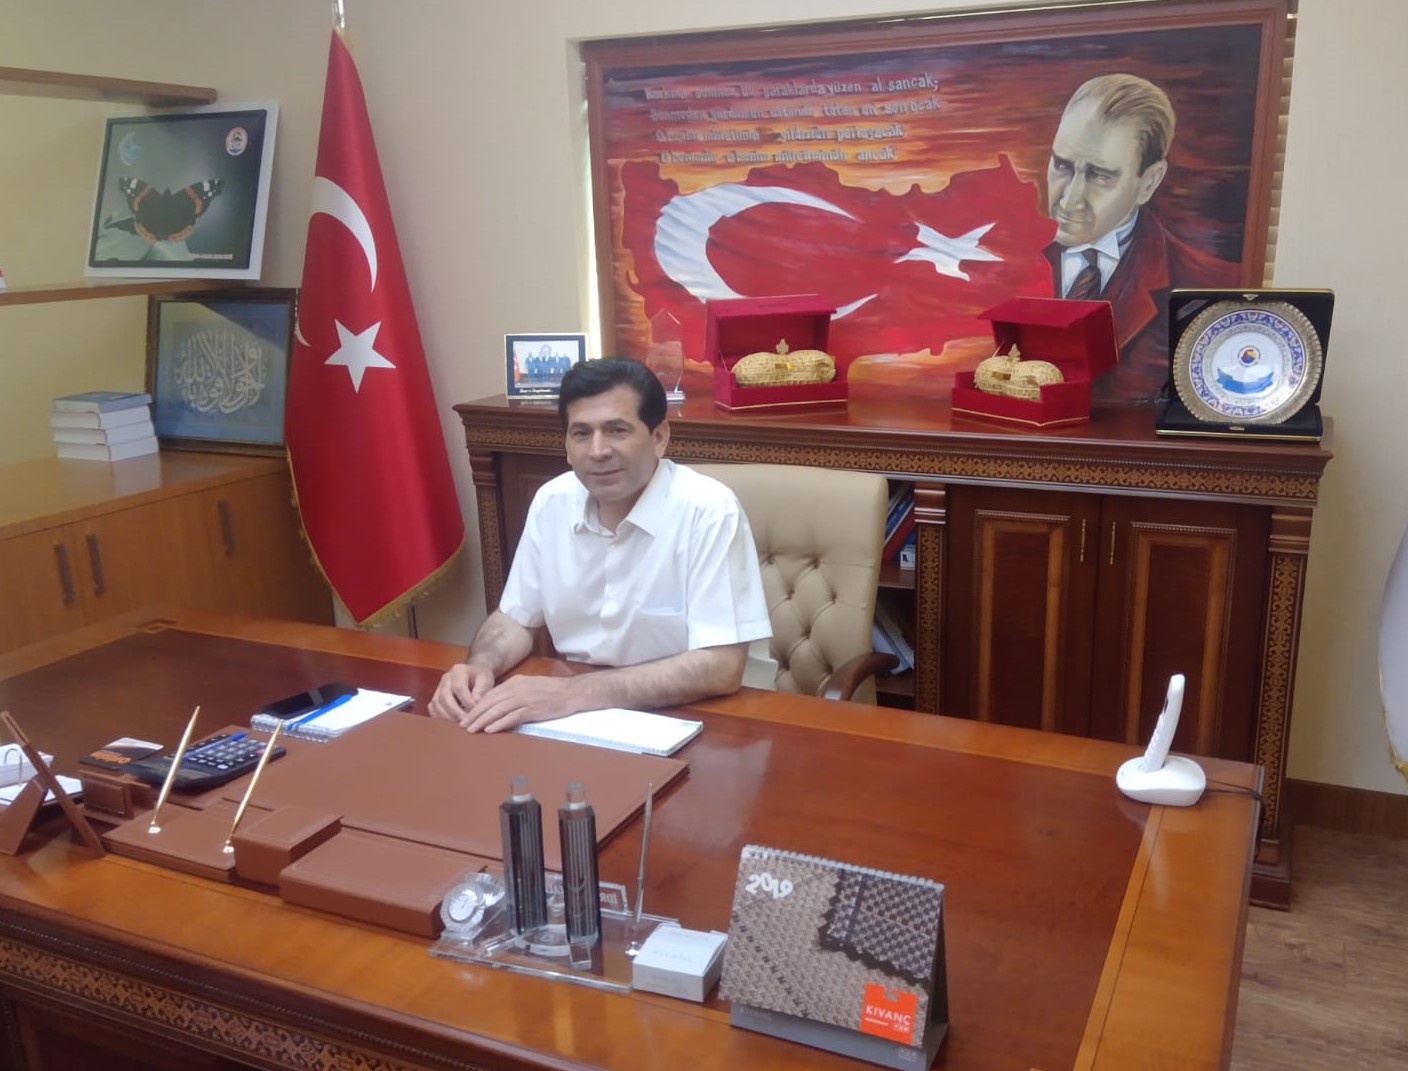  MESSAGE FROM THE CHAIRMAN OF THE BOARD OF DIRECTORS İDRİS ÇEVİKALP, JULY 15 DEMOCRACY AND NATIONAL UNION DAY